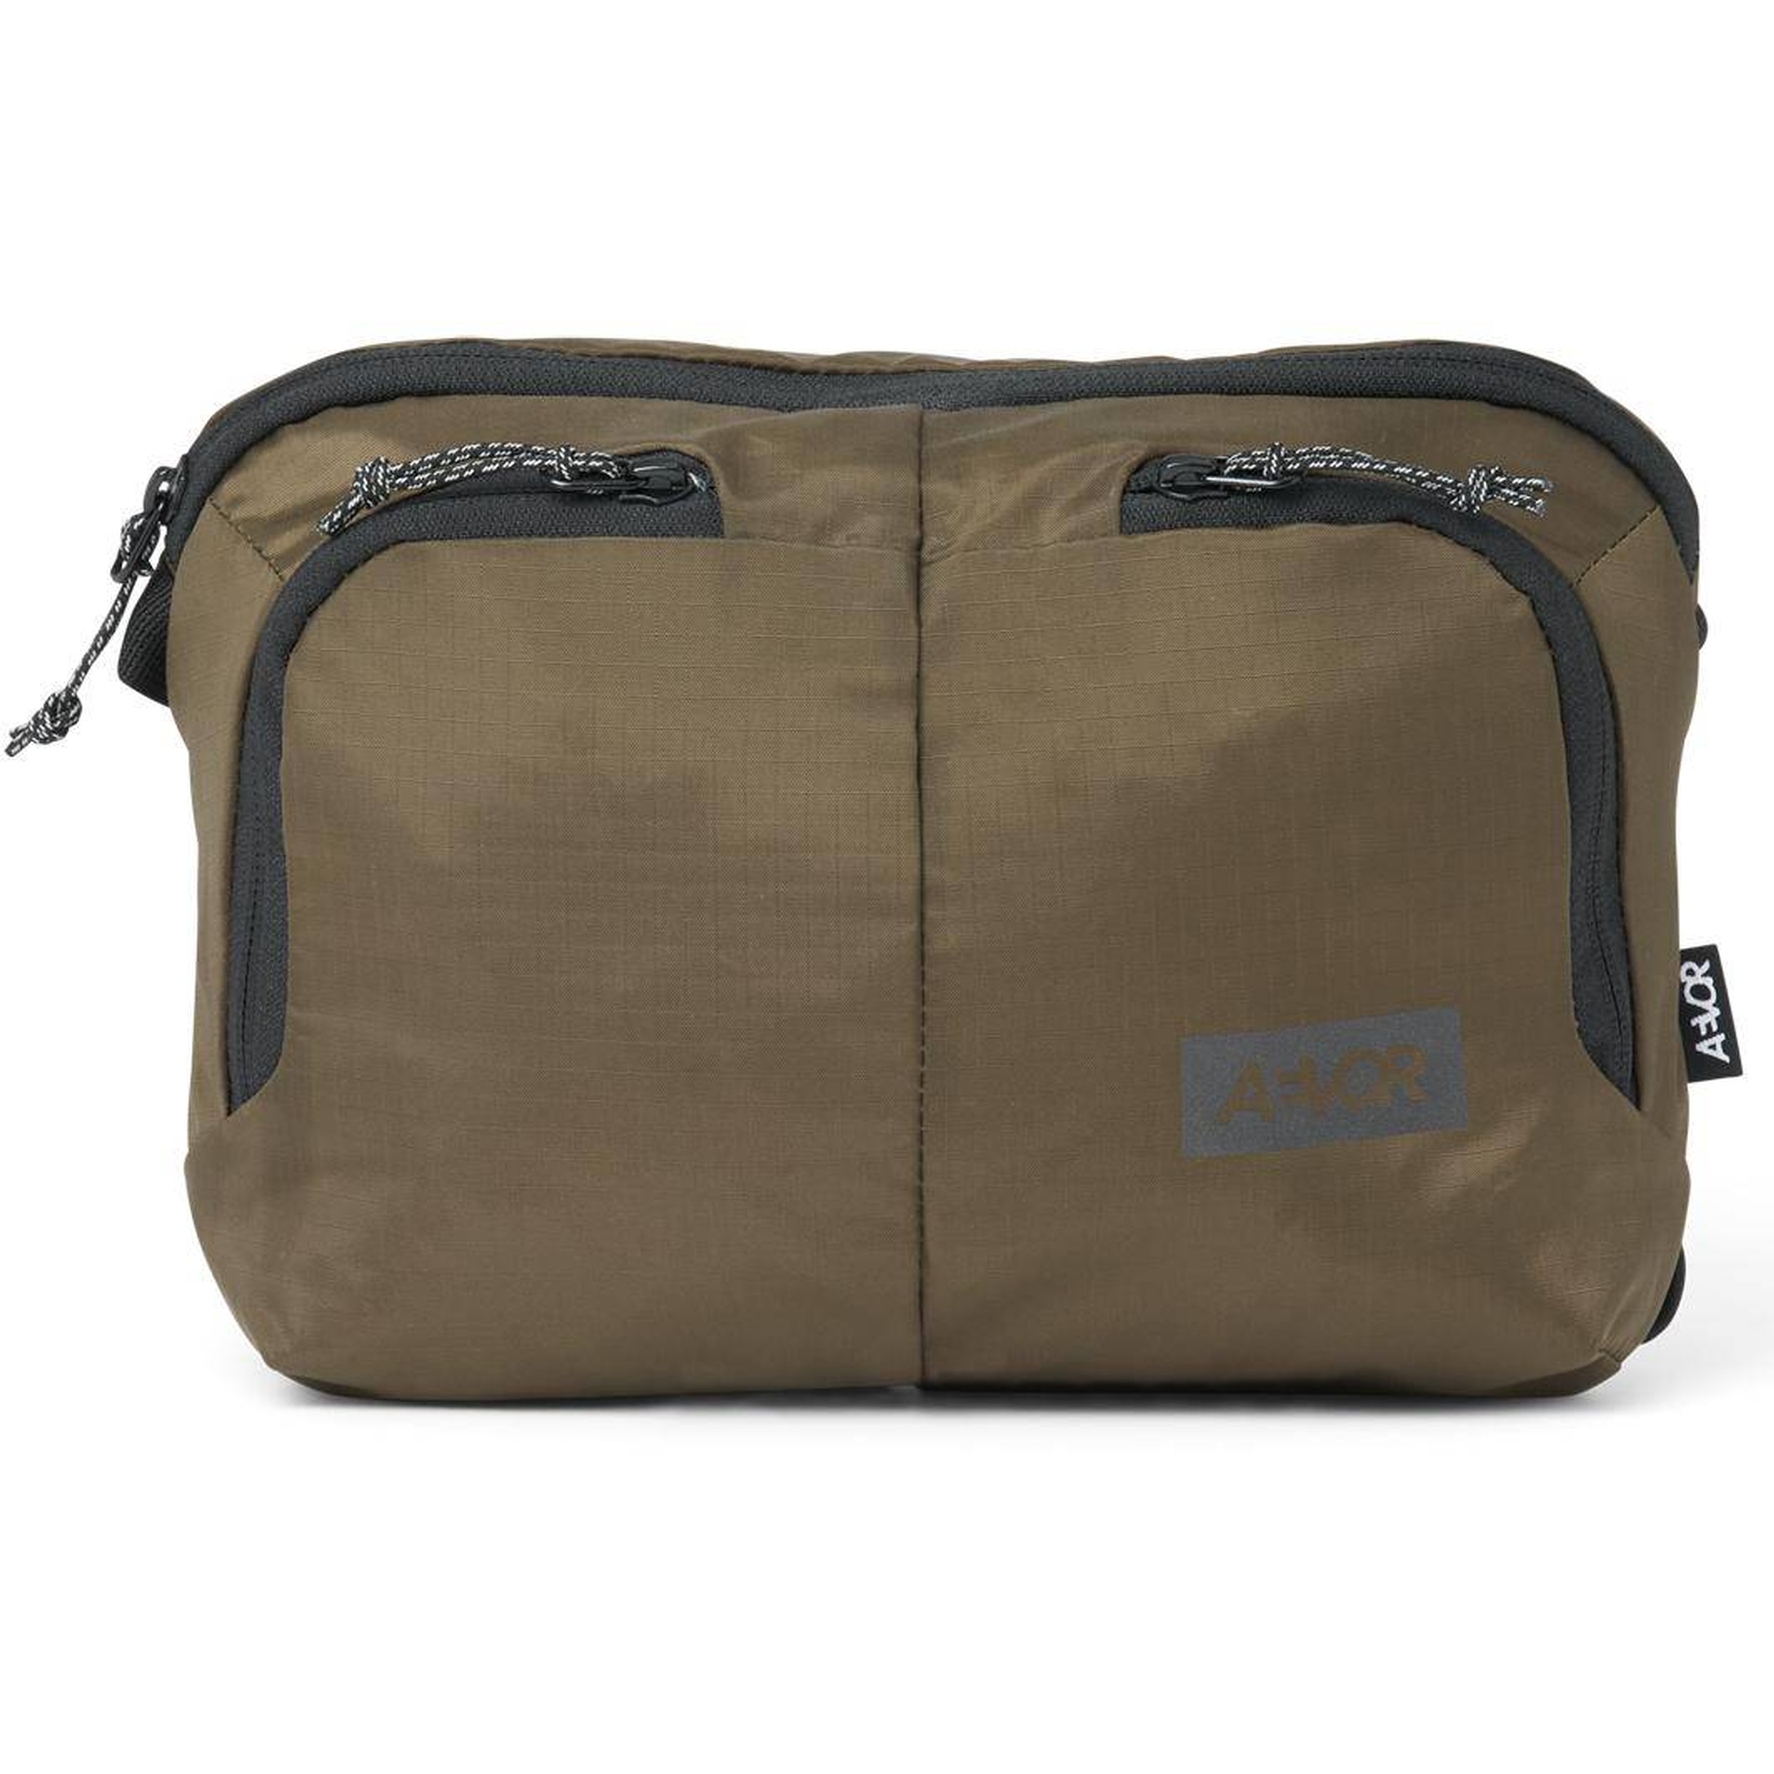 Picture of AEVOR Sacoche Bag - Ripstop Olive Gold